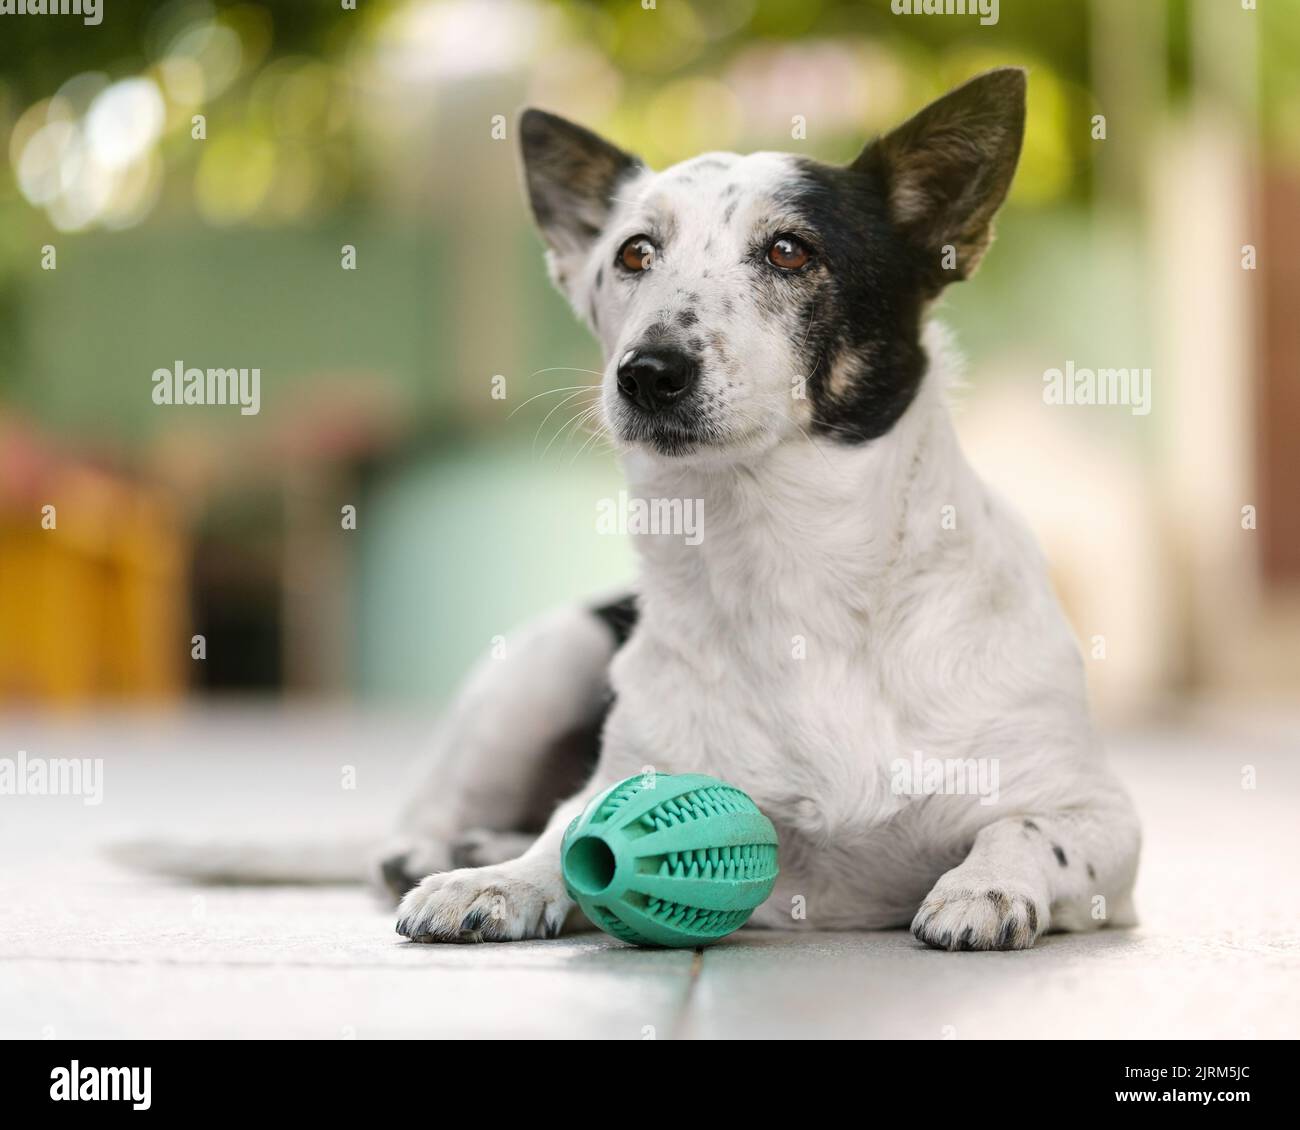 Close up shot of a cute black and white dog lying down, green rubber toy between her legs. Stock Photo